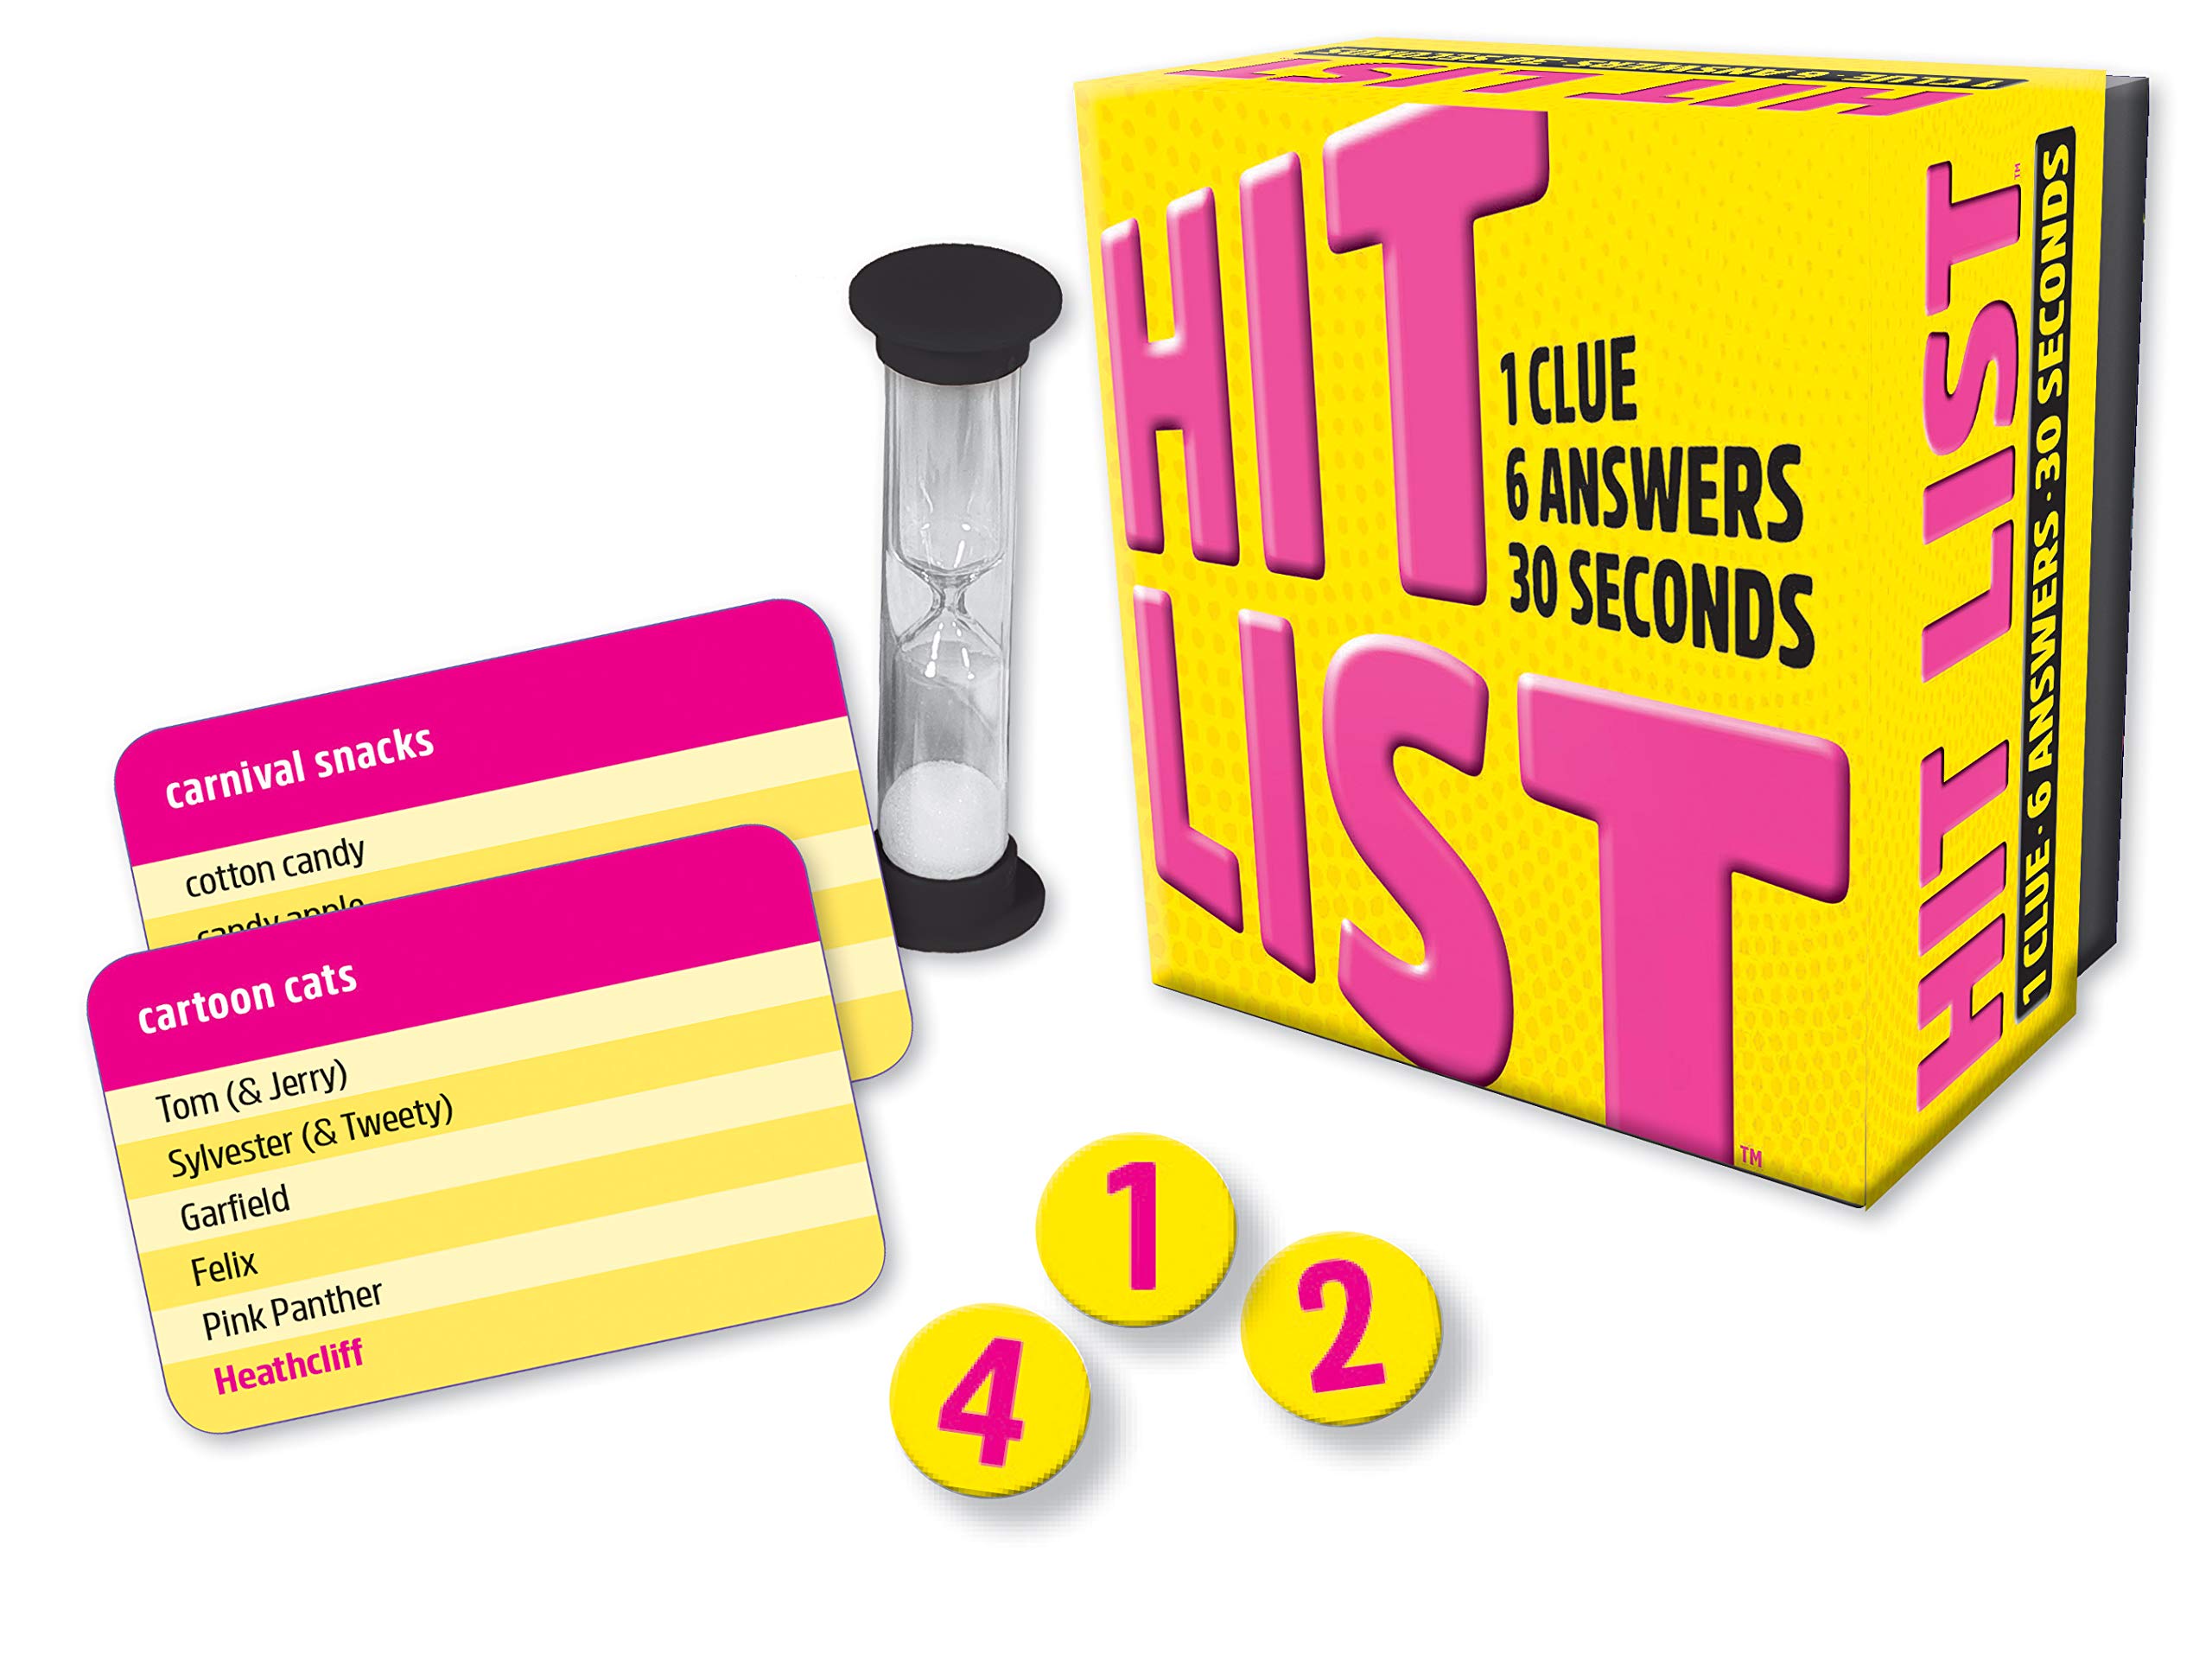 Gamewright - Hit List - 1 Clue, 6 Answers, 30 Seconds